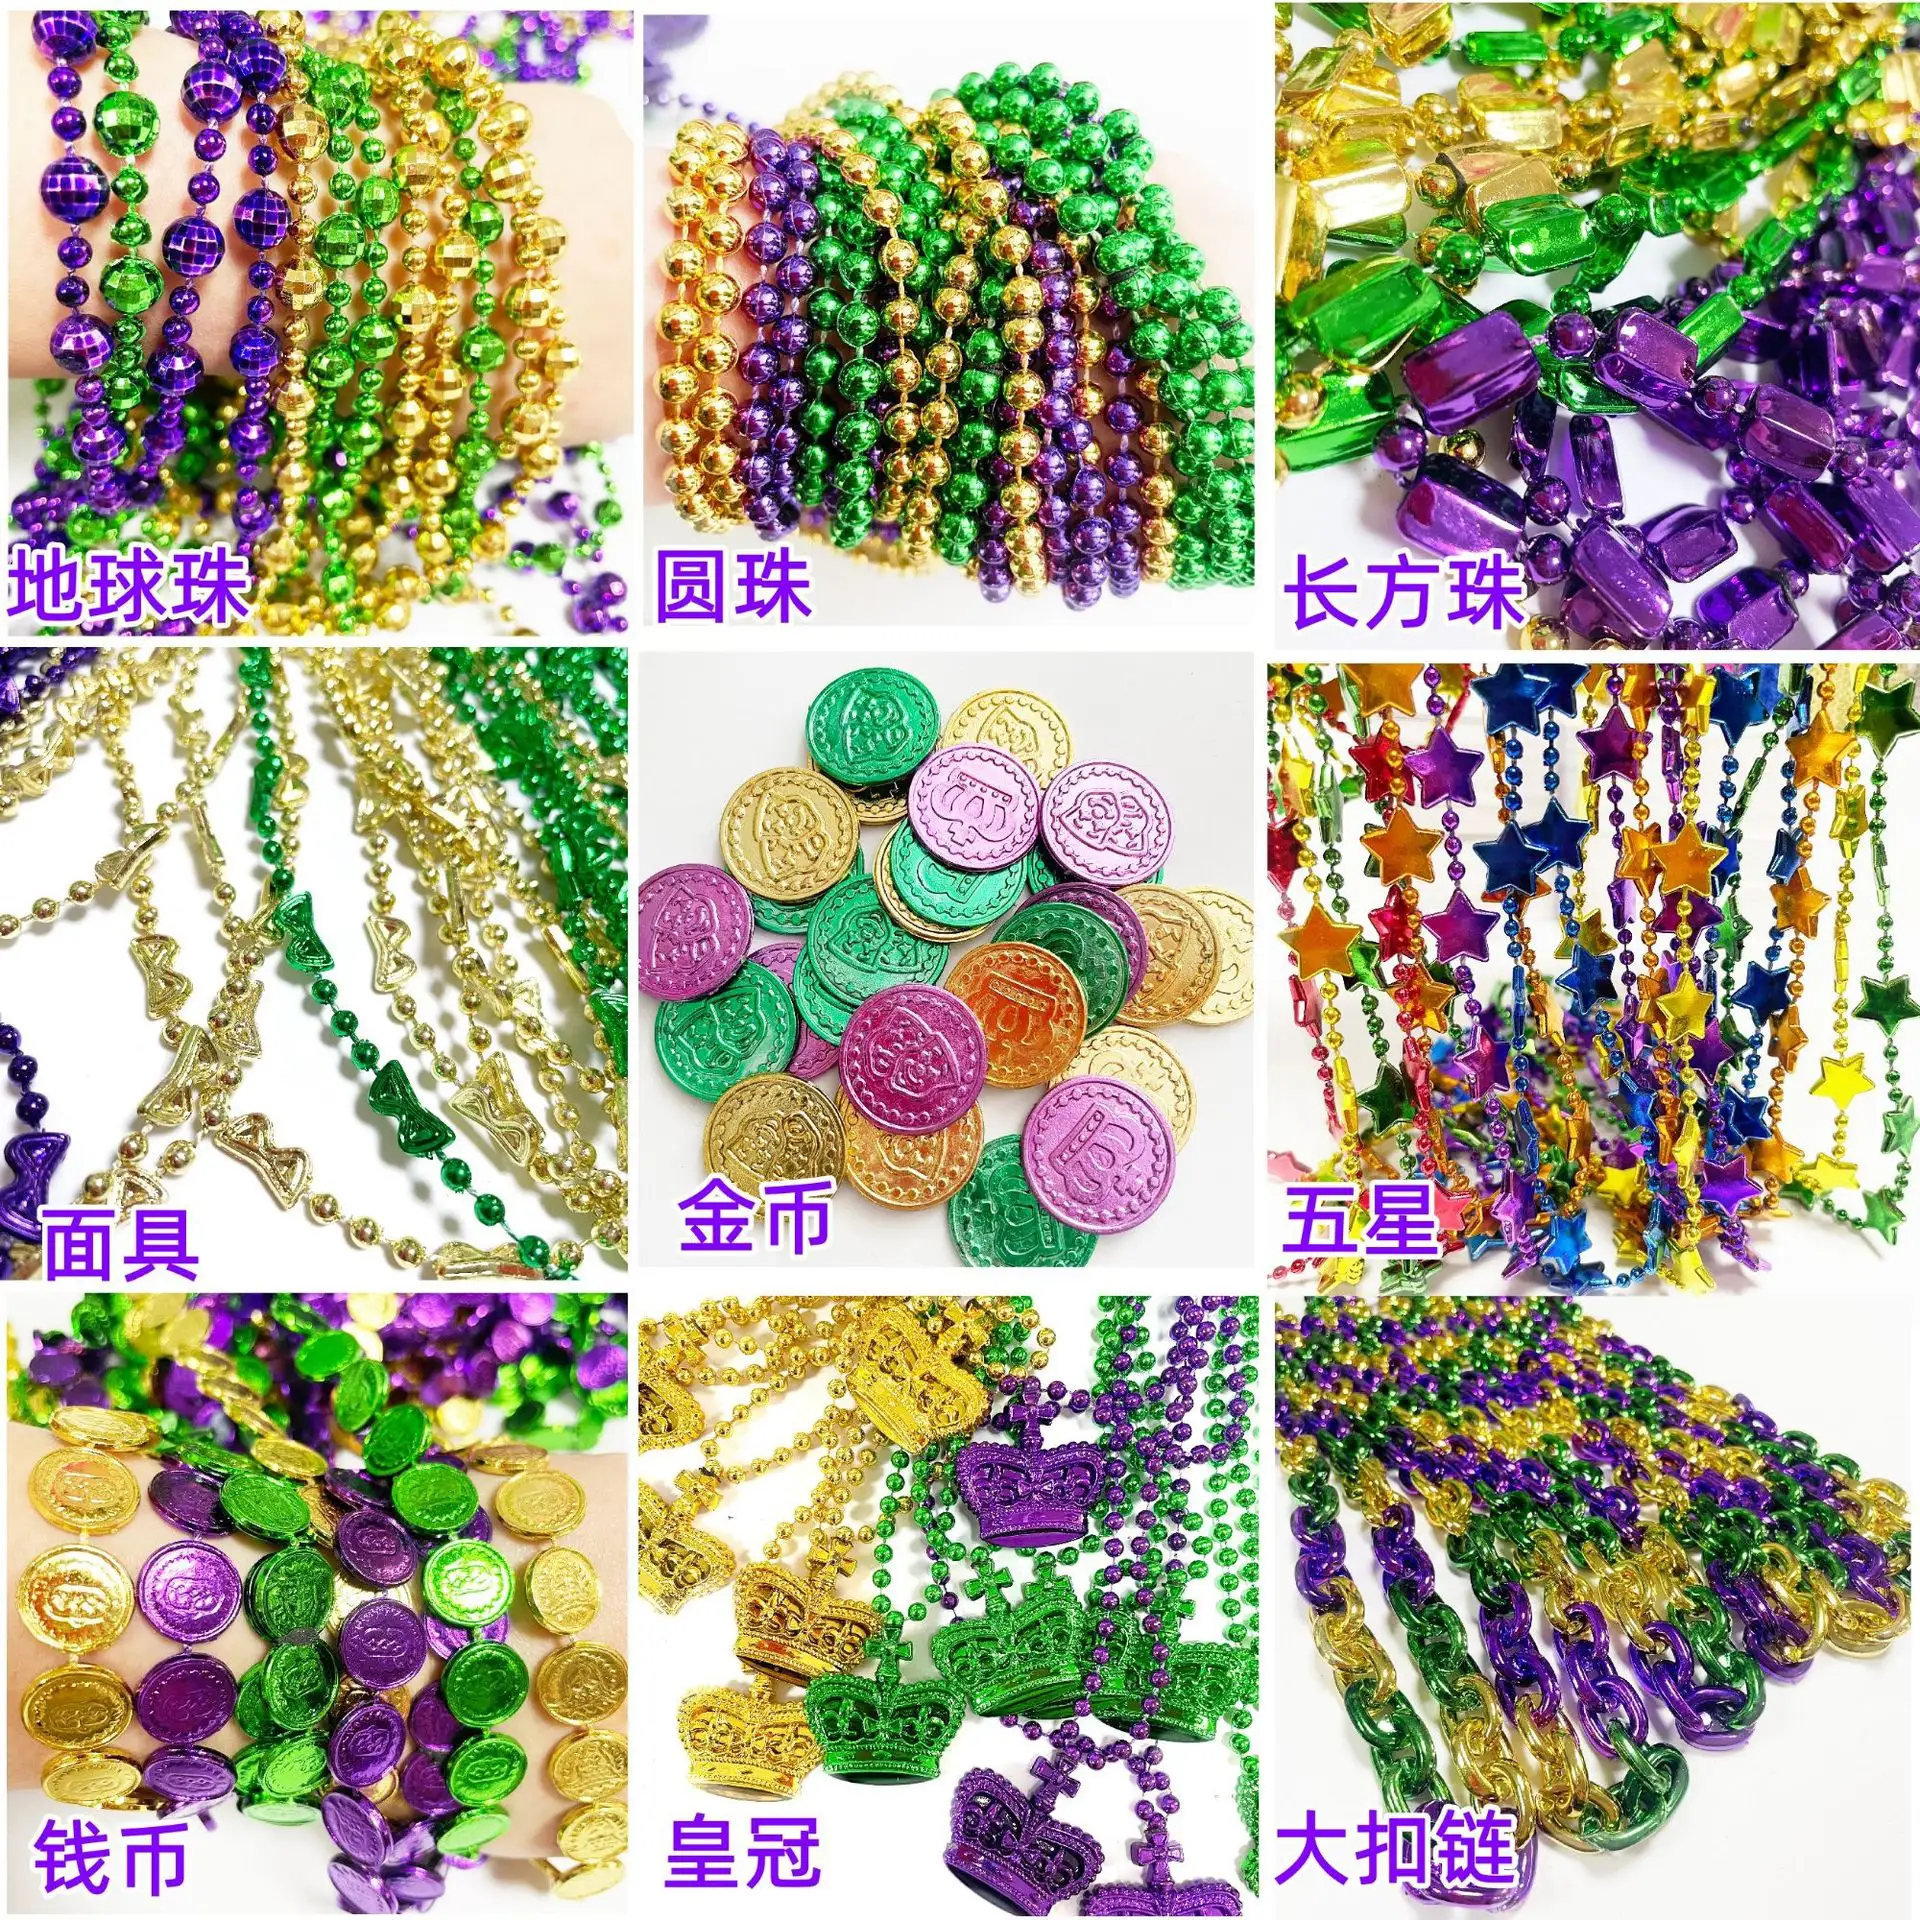 Cheap price Mardi Gras Beads metallic Jumbo Chain Link Necklace Mardi Gras Throw Ball Beads plastic necklace for carnival